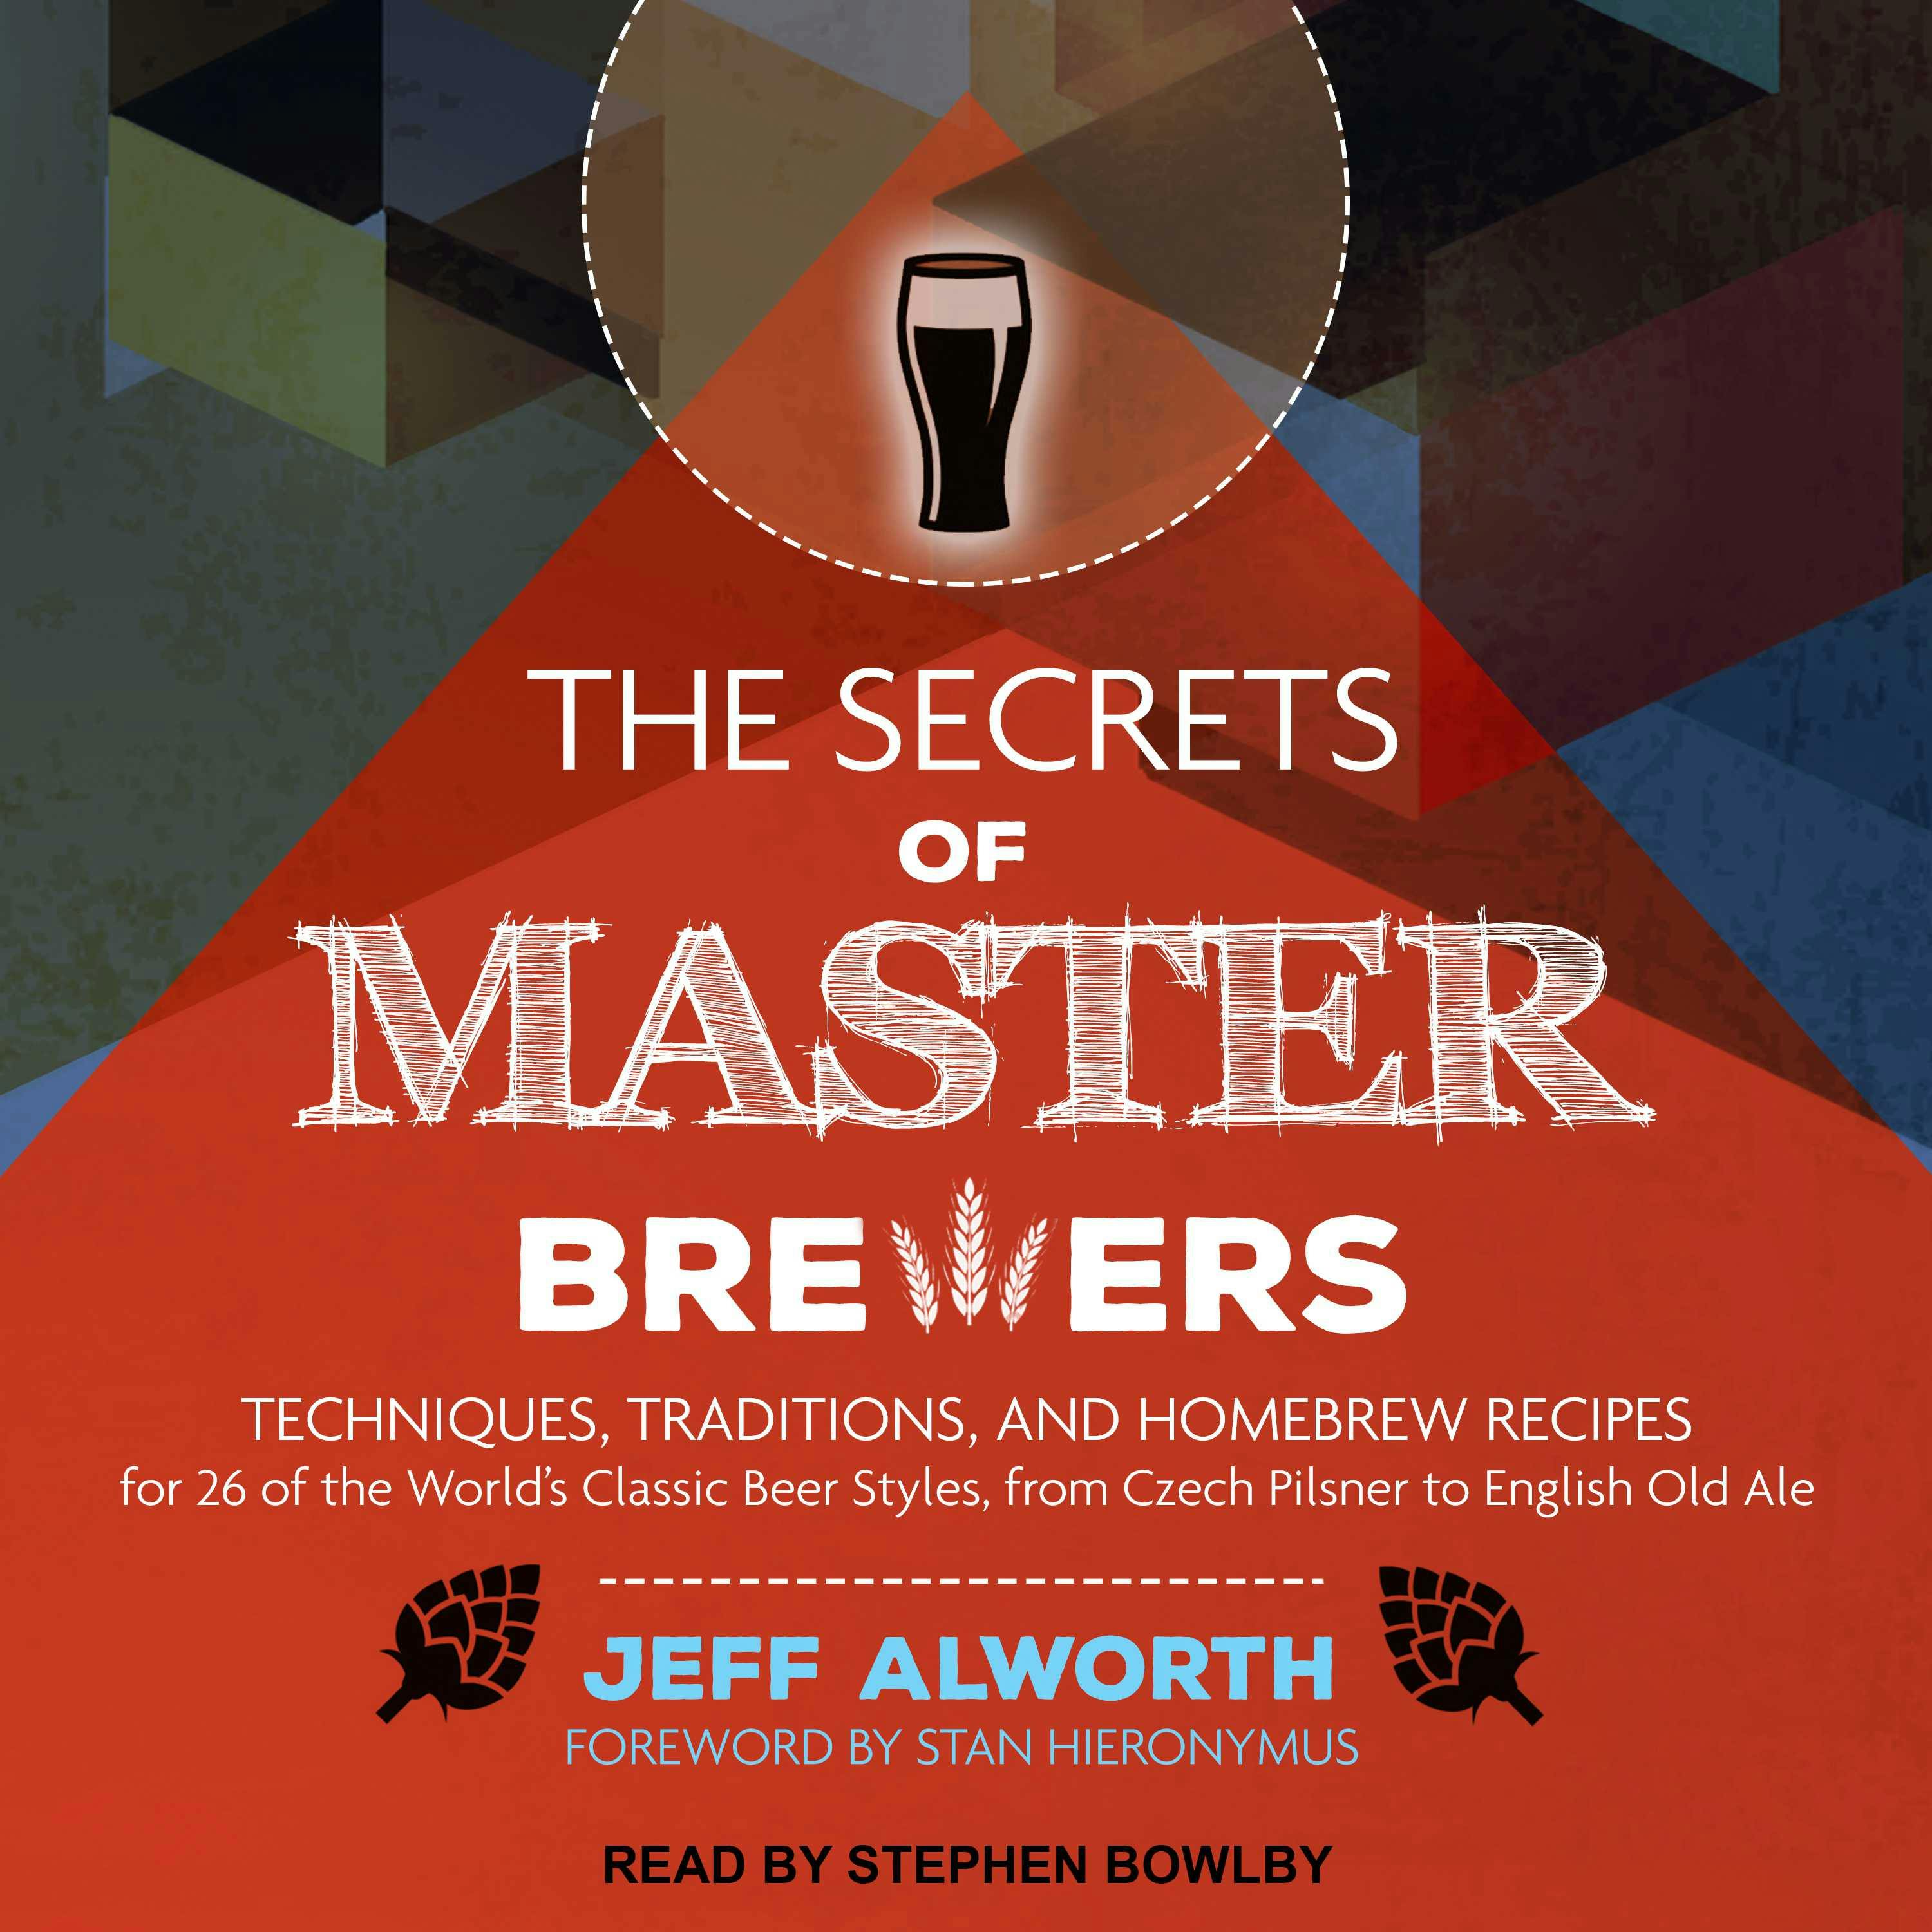 The Secrets of Master Brewers: Techniques, Traditions, and Homebrew Recipes for 26 of the World's Classic Beer Styles, from Czech Pilsner to English Old Ale - Jeff Alworth